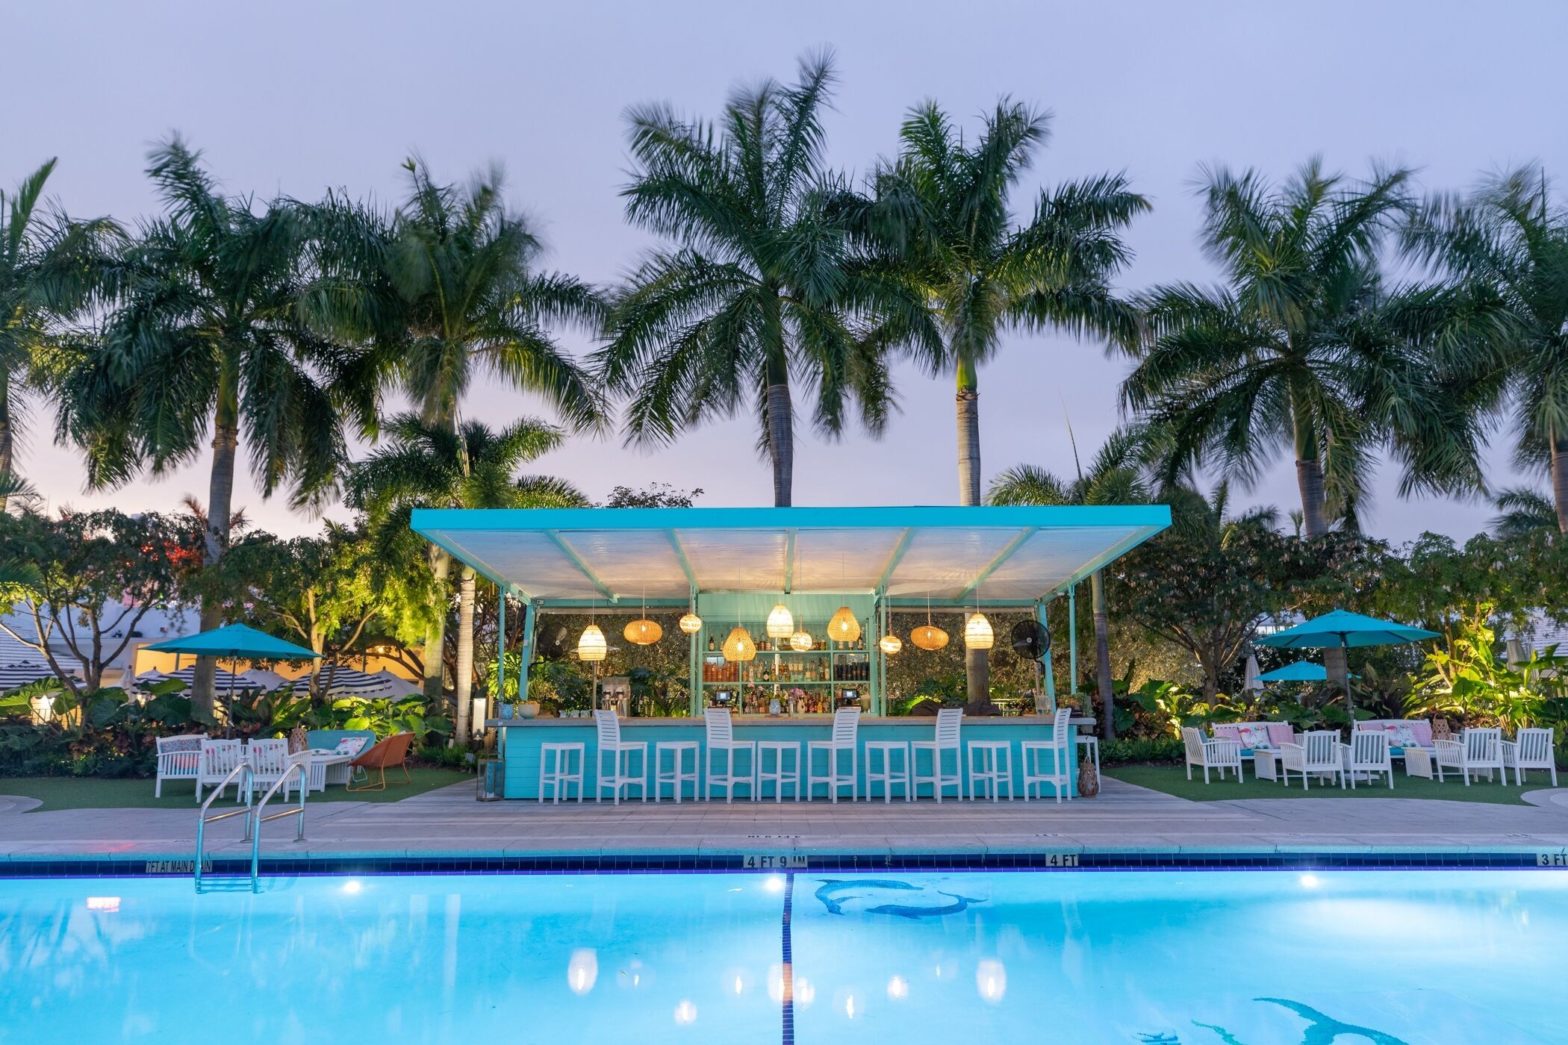 Dream Job: Hotels.com Seeks Retro Beach Motelier To Work In Coastal Motels In The US This Summer